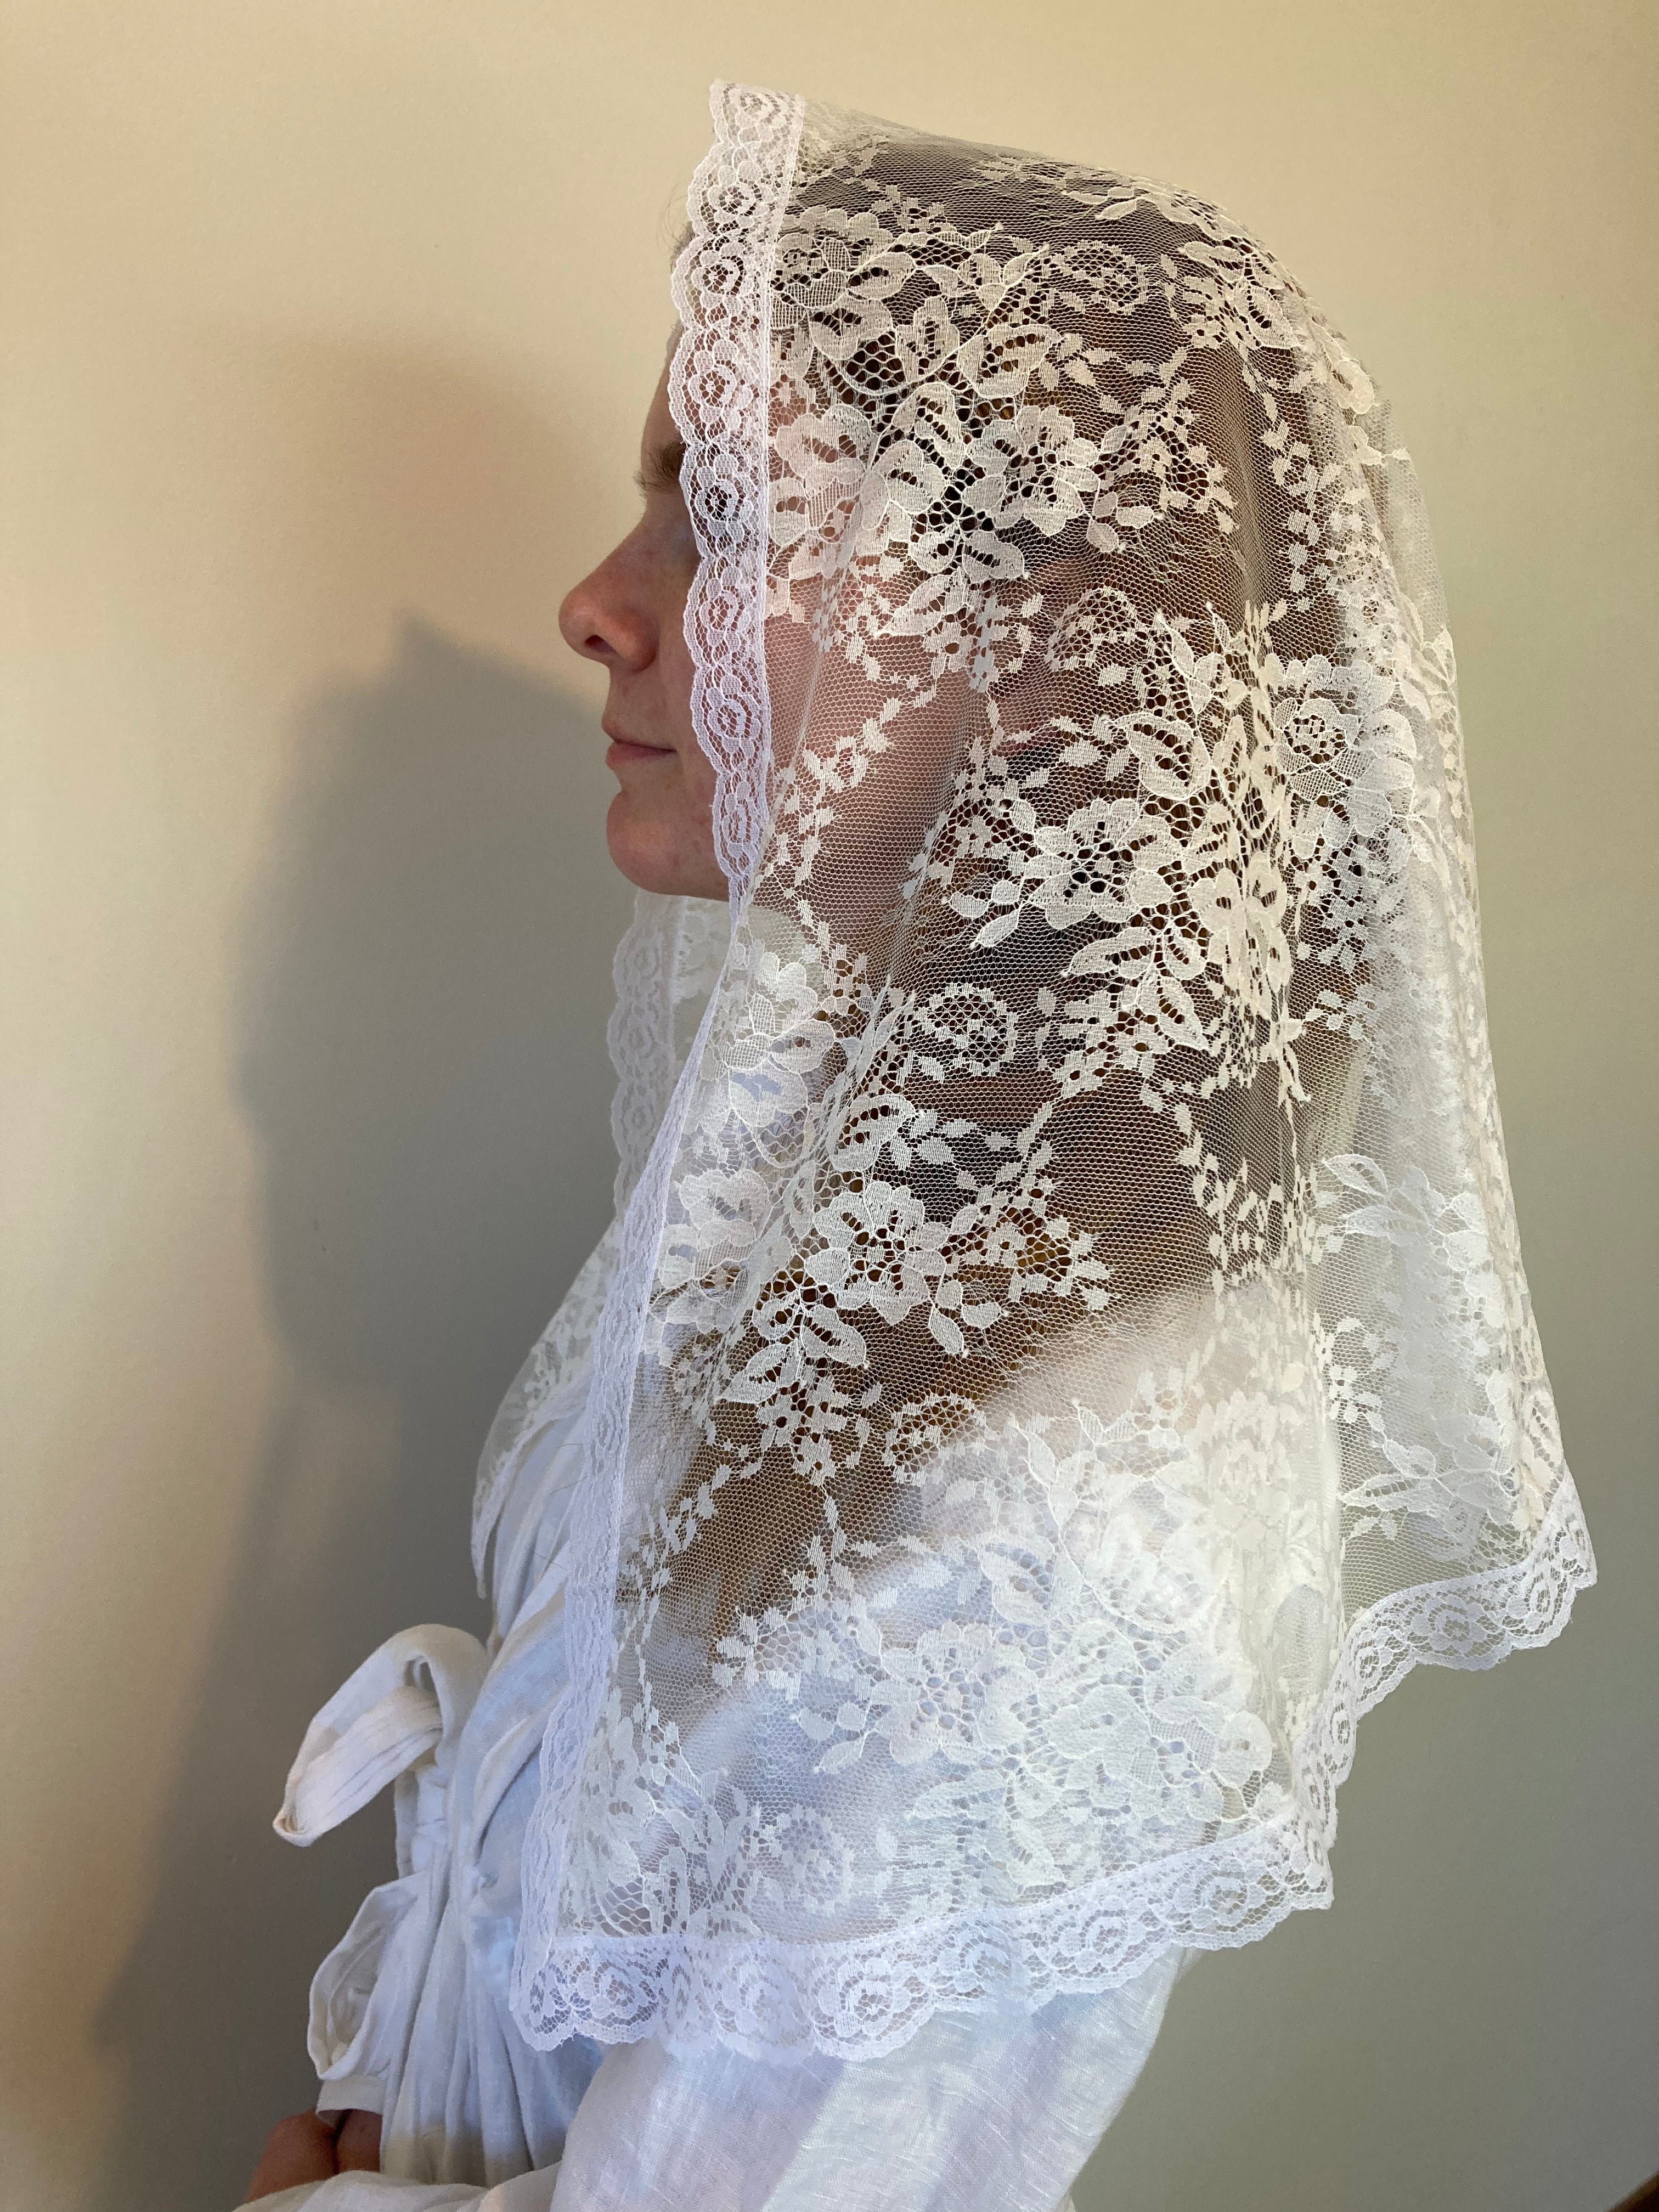 St Therese of Lisieux veil